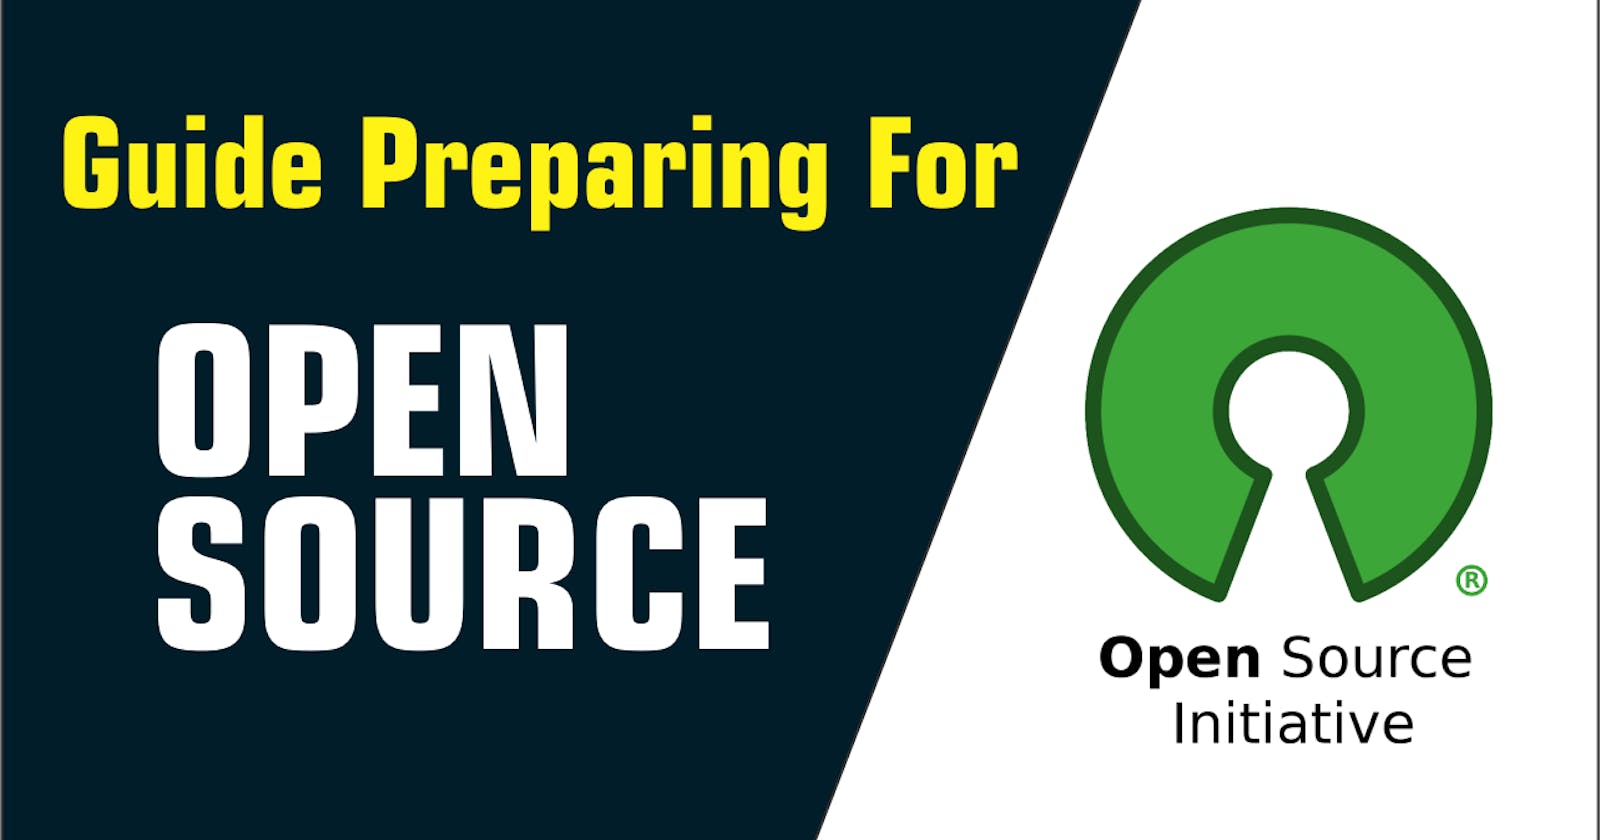 🔴 Contributing to OPEN SOURCE  projects